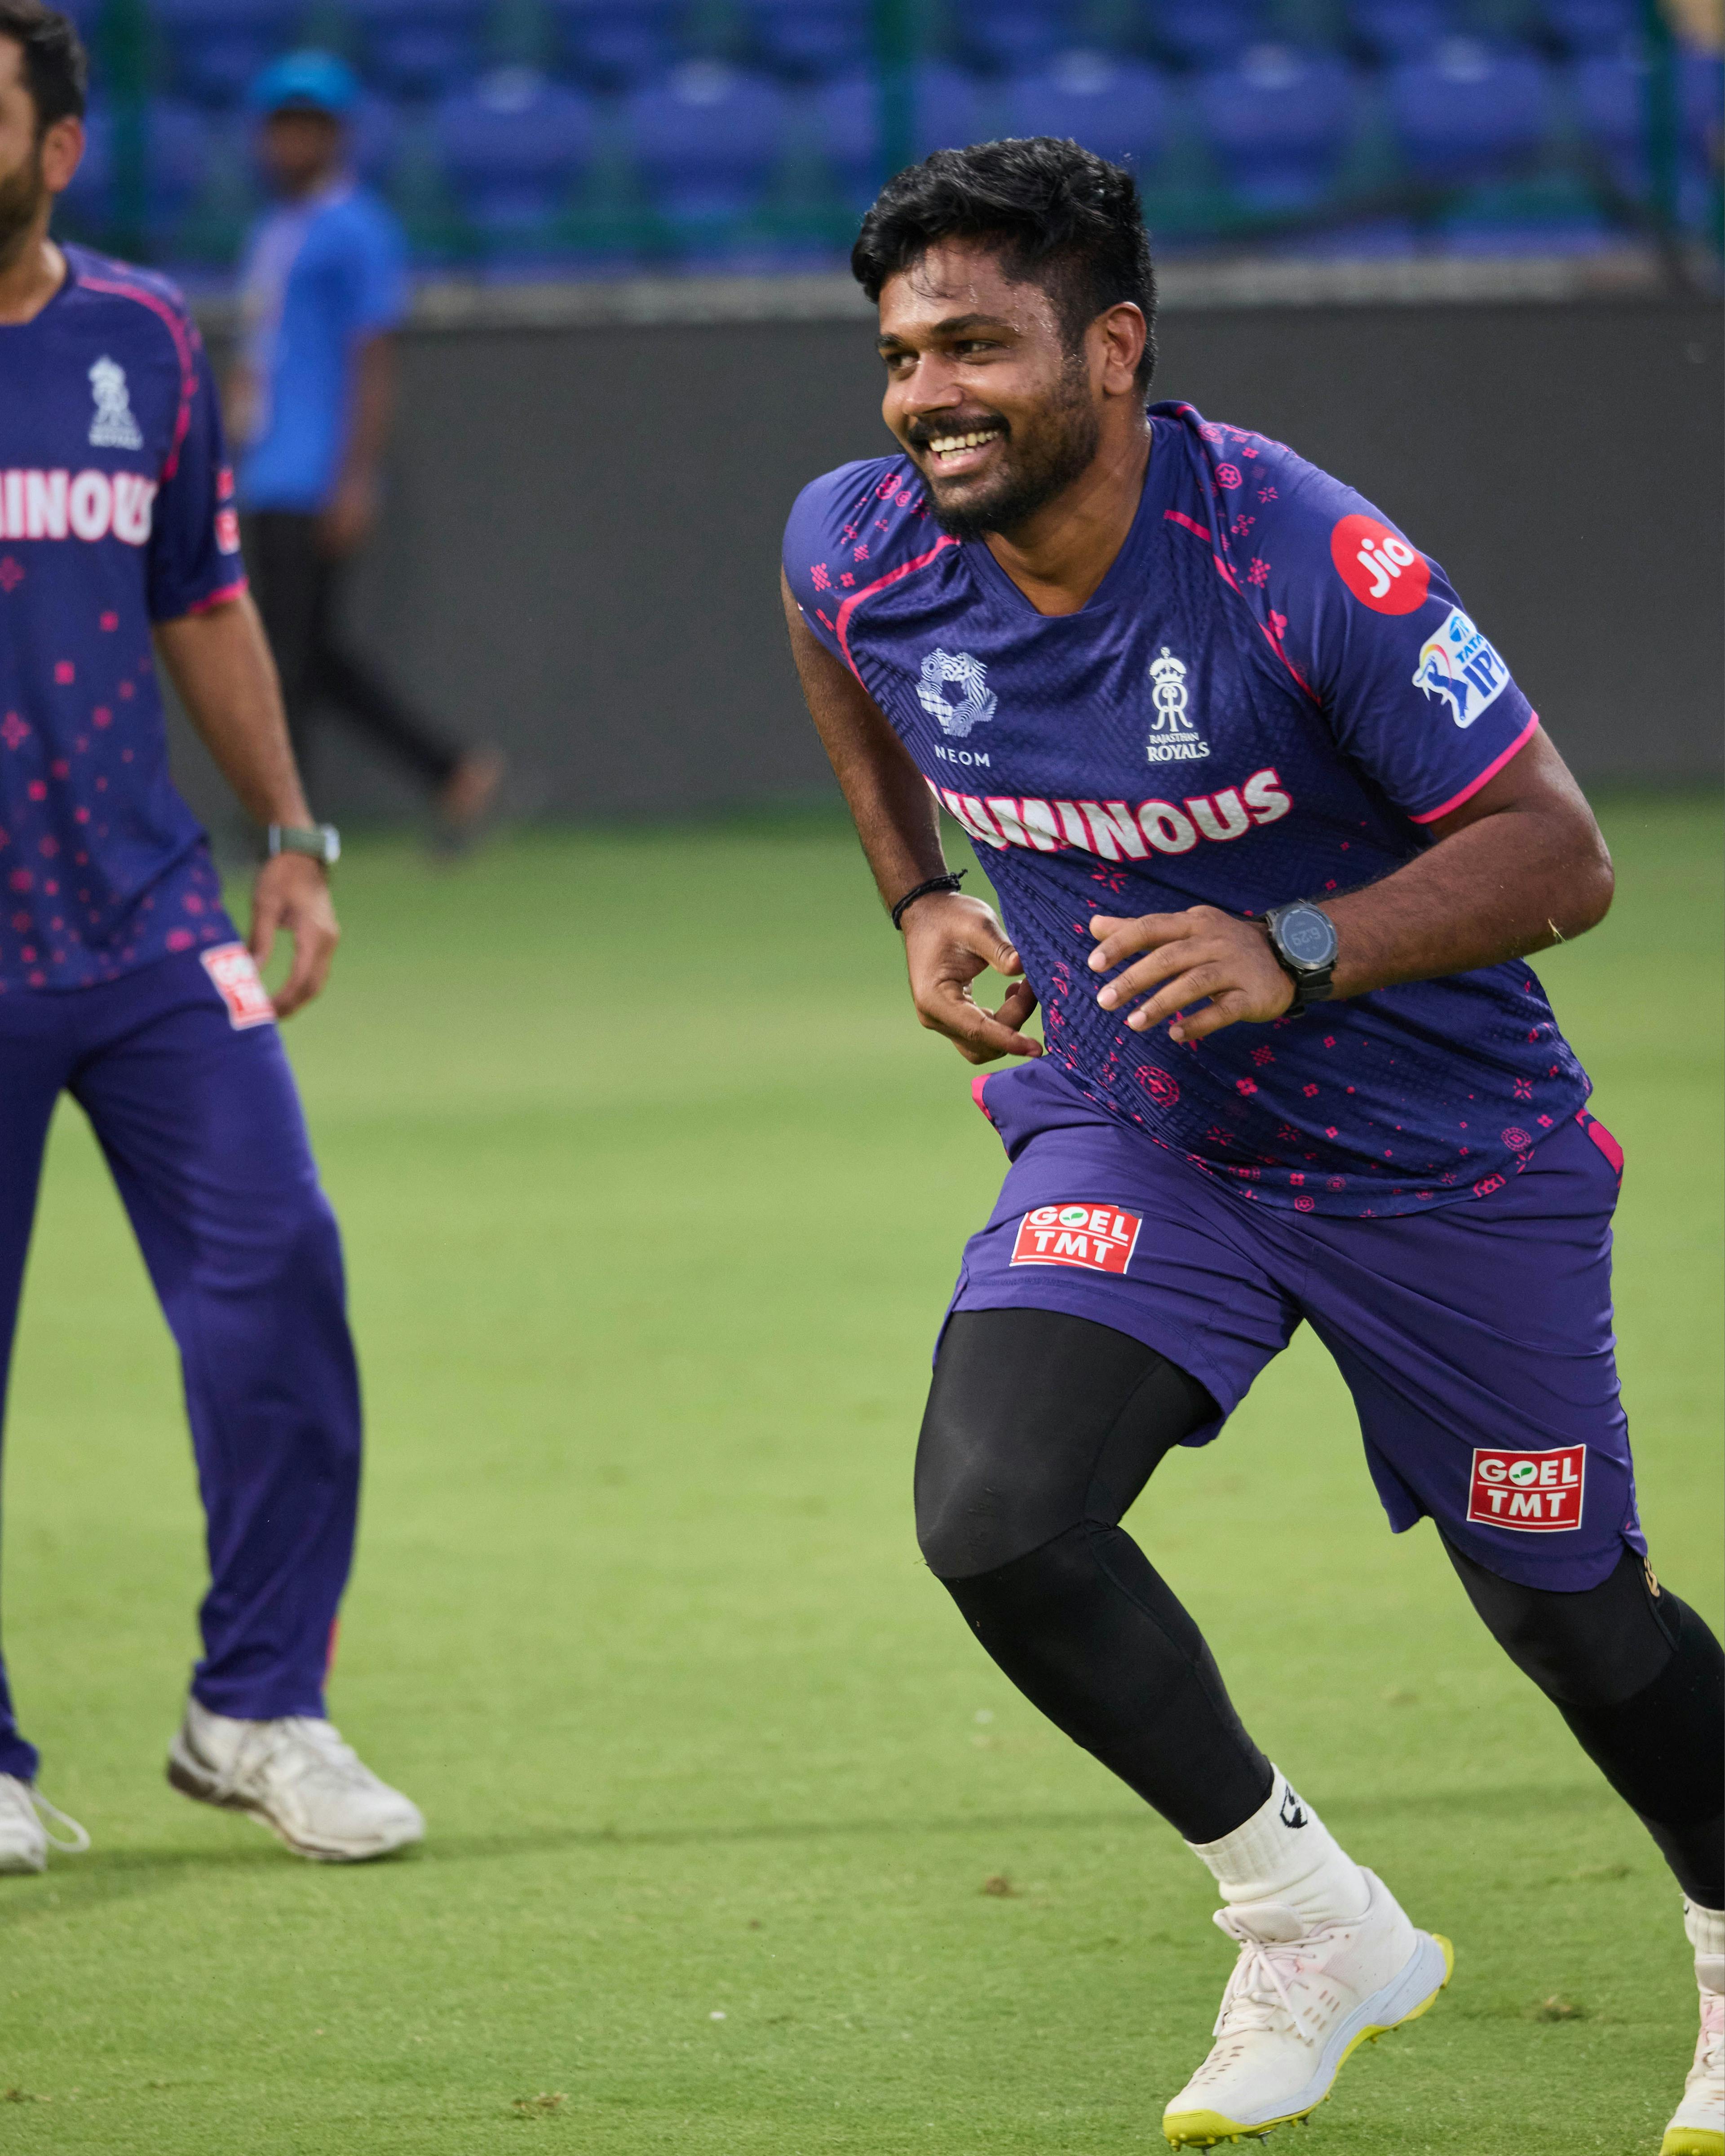 T20 World Cup: Sanju Samson is ready to play as India's first-choice wicketkeeper, says Naman Ojha